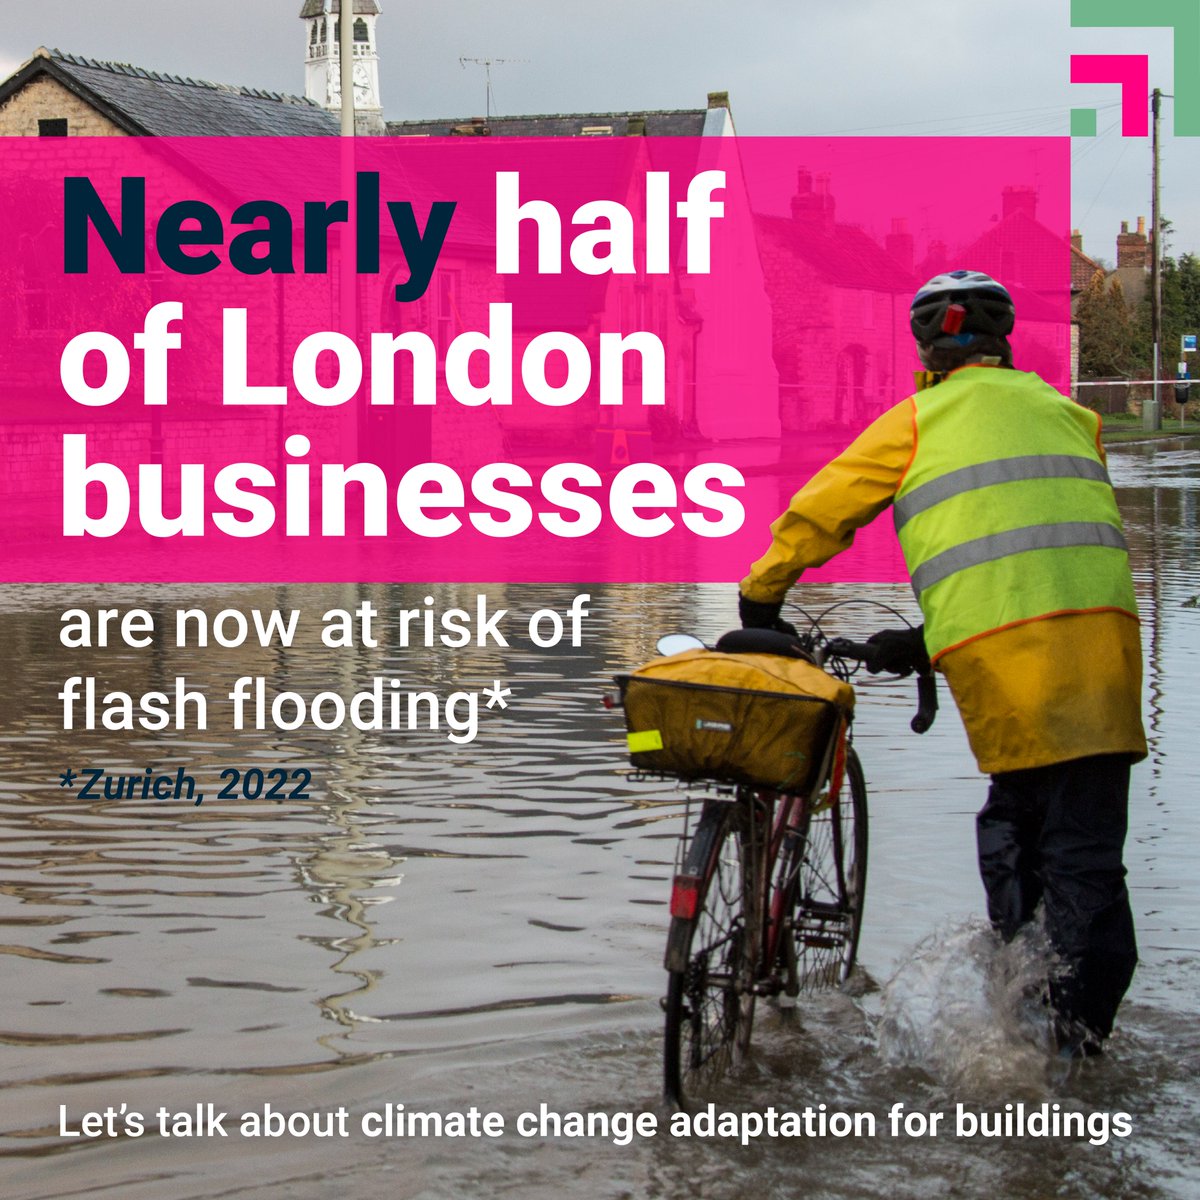 By prioritising adaptability at individual building level, we’re reducing vulnerability to the effects of climate change and increasing the overall preparedness of our built environment to cope with these changes 🌍 Find out more about climate adaptation: equans.co.uk/adaptation